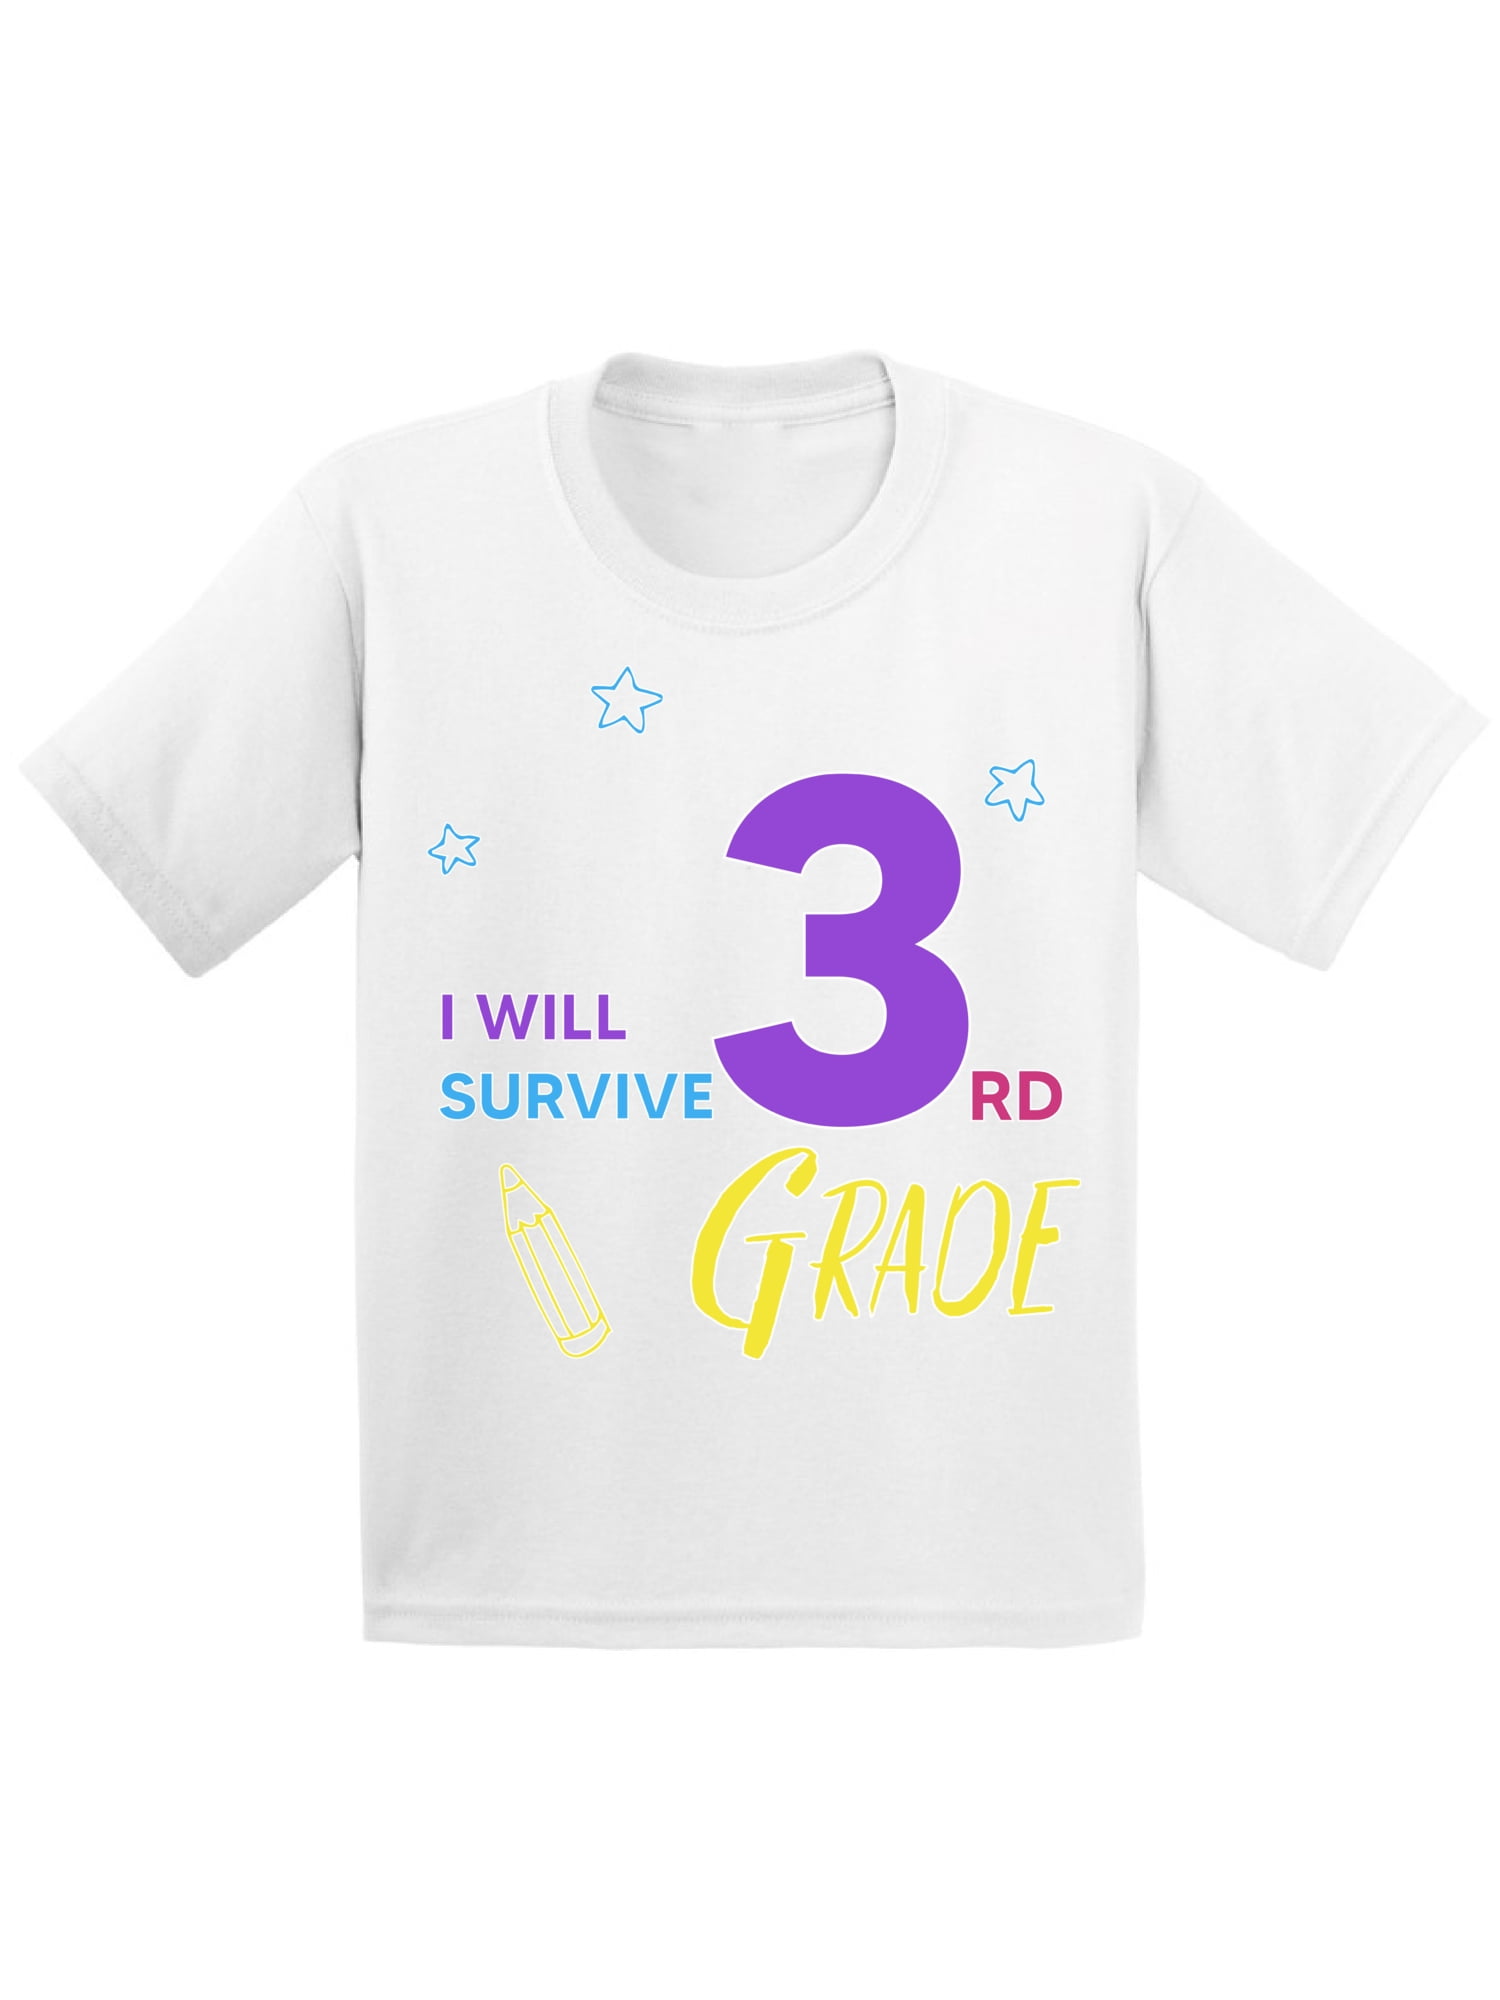 Elementary School Kids T-Shirt 1st day 3rd grade T-Shirts First Day 3rd Grade Shirt for Boy and Girl Back to School Youth Shirts